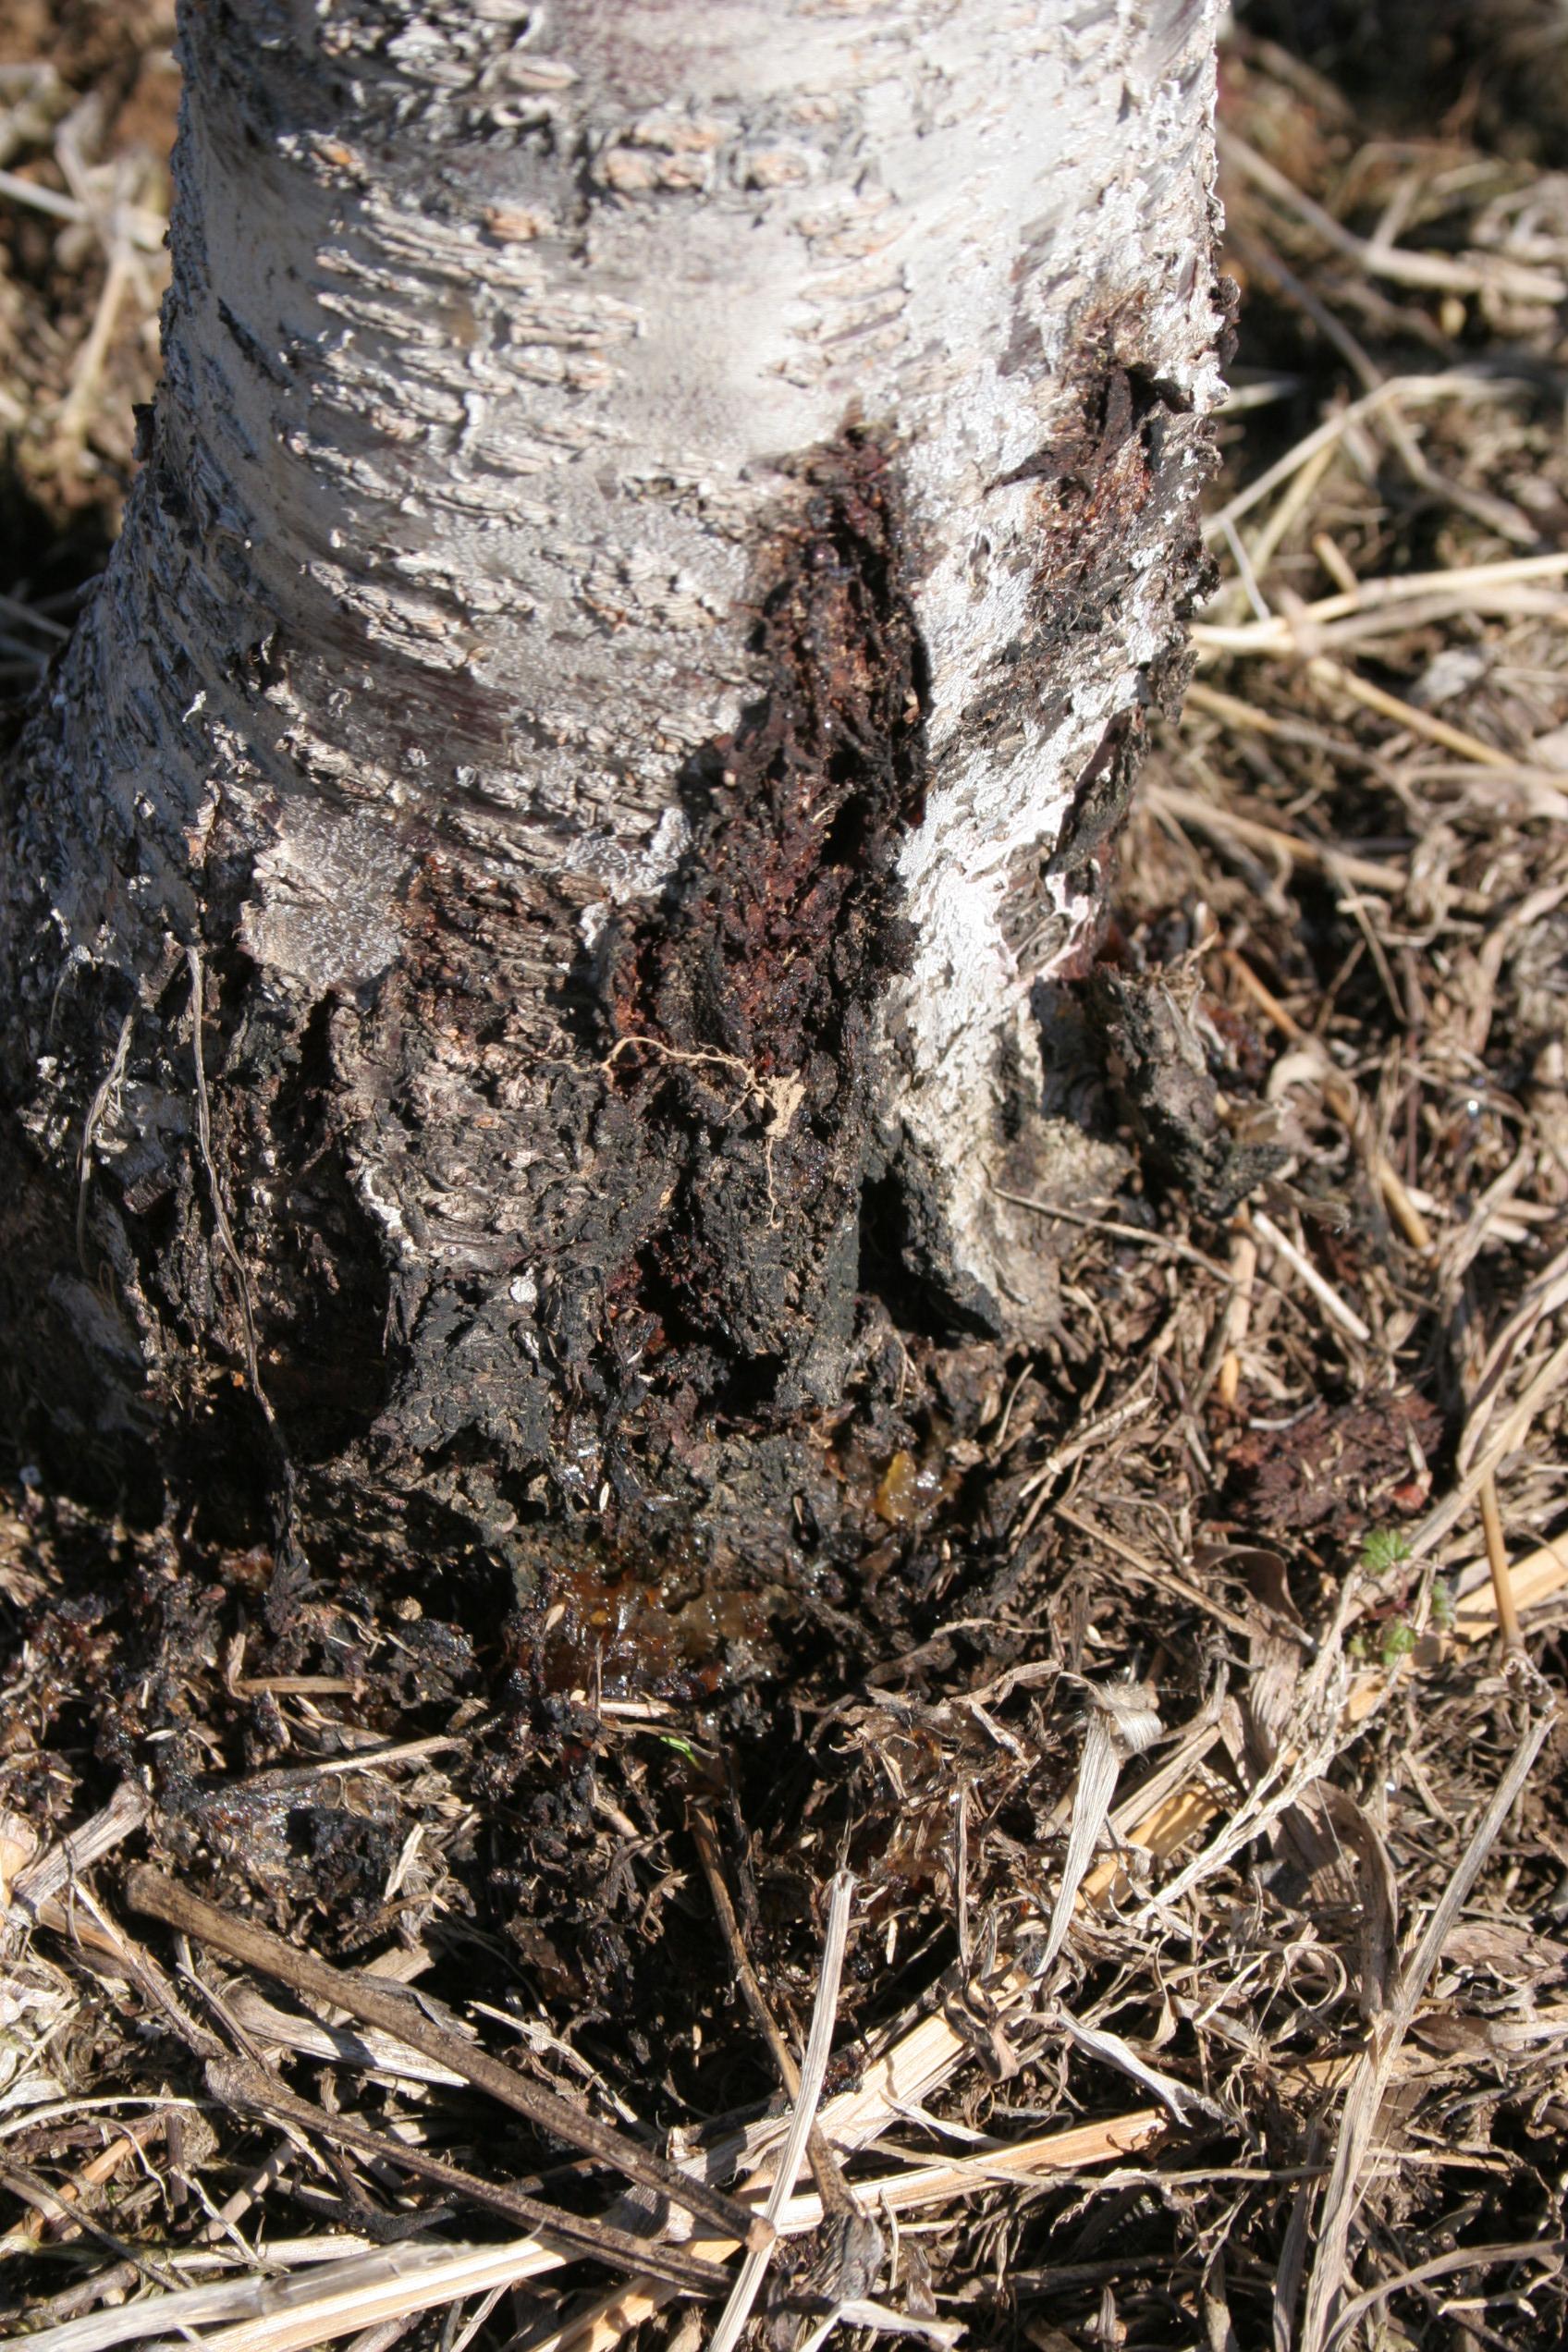 Peachtree borer damage at base of trunk. 